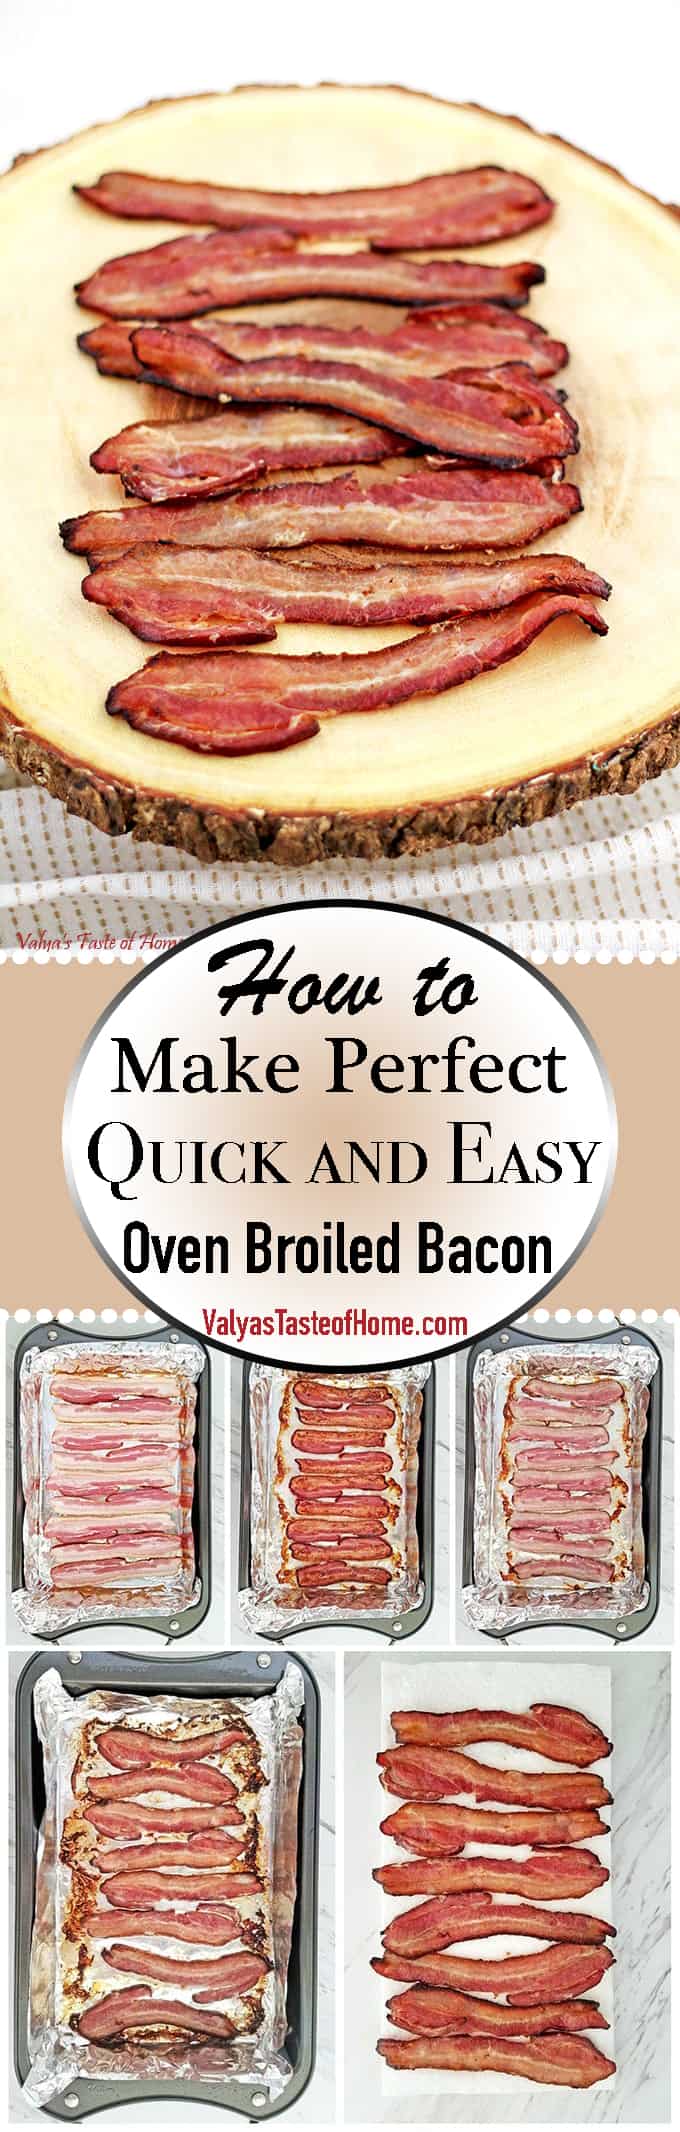 How To Make Perfect Quick And Easy Oven Broiled Bacon Valya S Taste Of Home,What Temperature To Bake Chicken Tenders